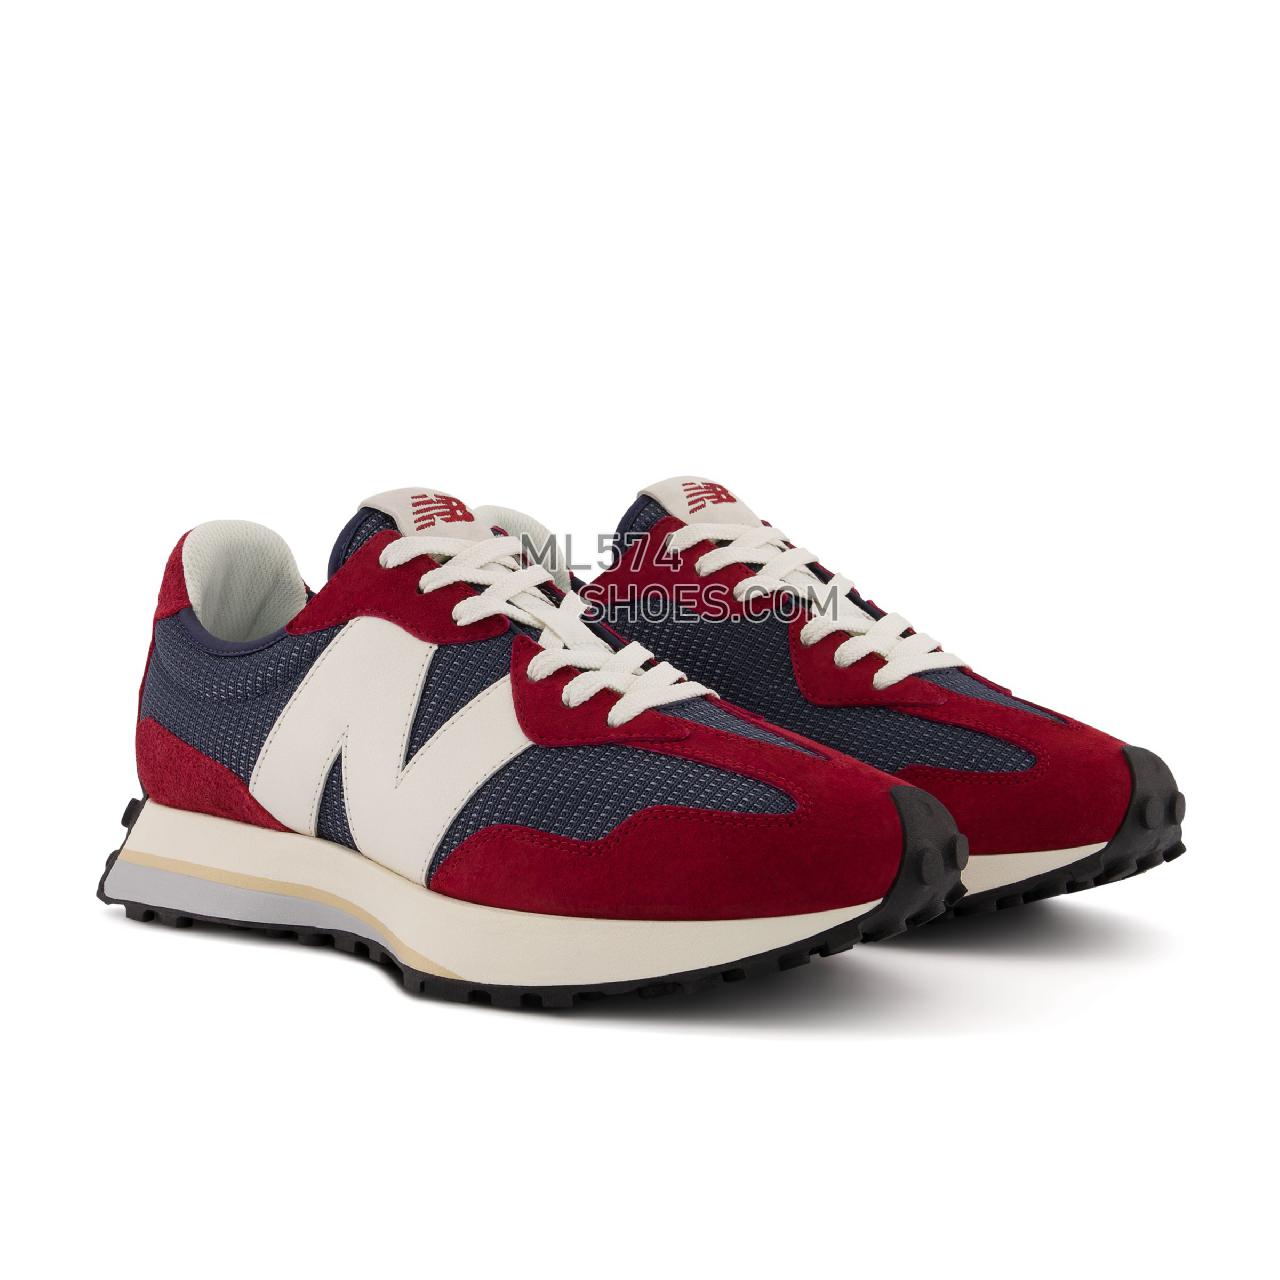 New Balance 327 - Men's Sport Style Sneakers - Nb Navy with Nb Scarlet - MS327MR